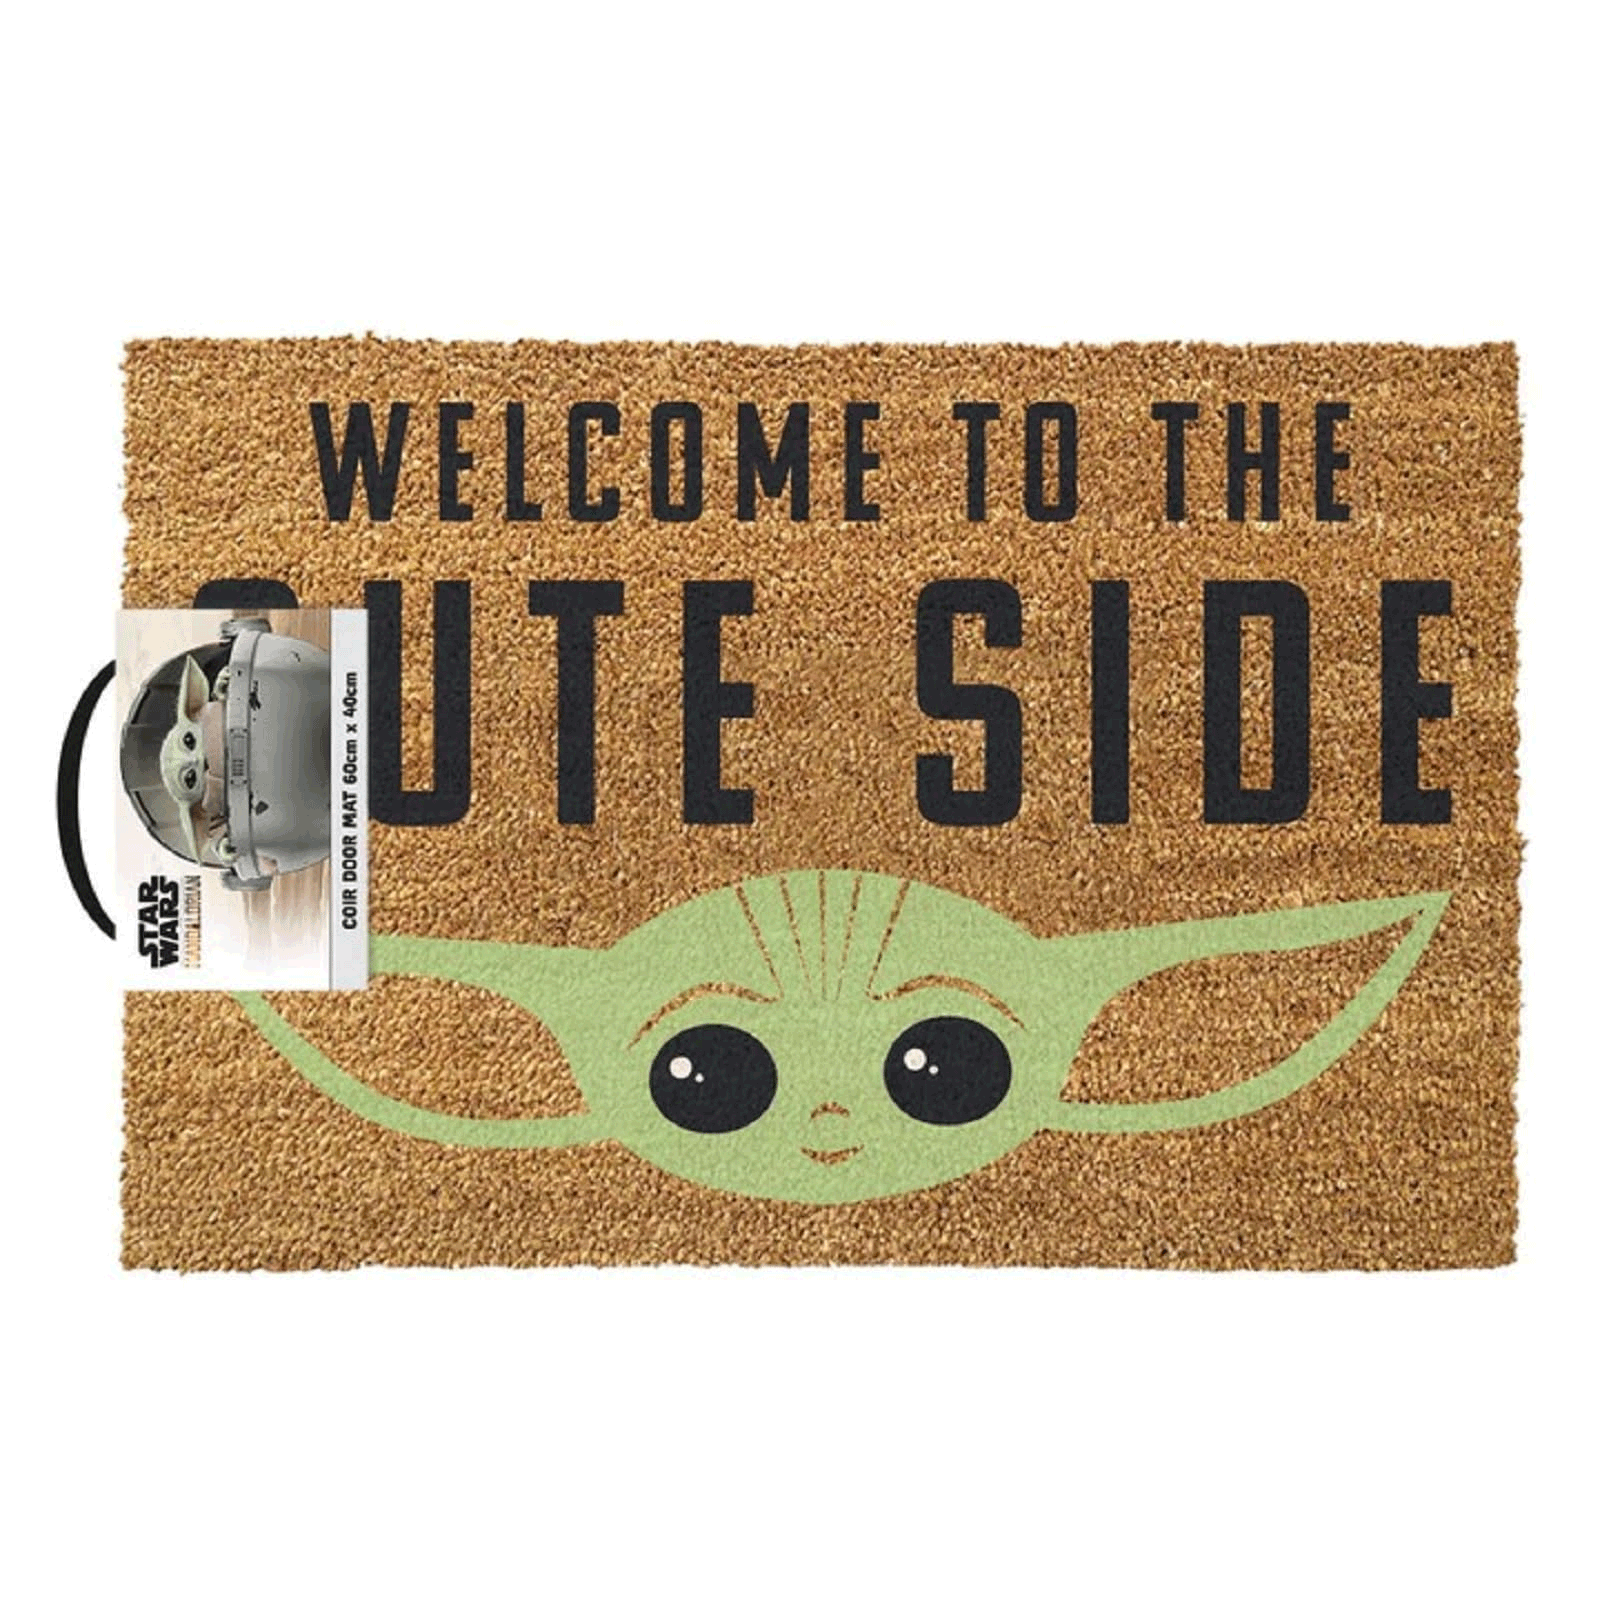 mandalorian_welcome_to_the_cute_side_doormat_1700149320.gif